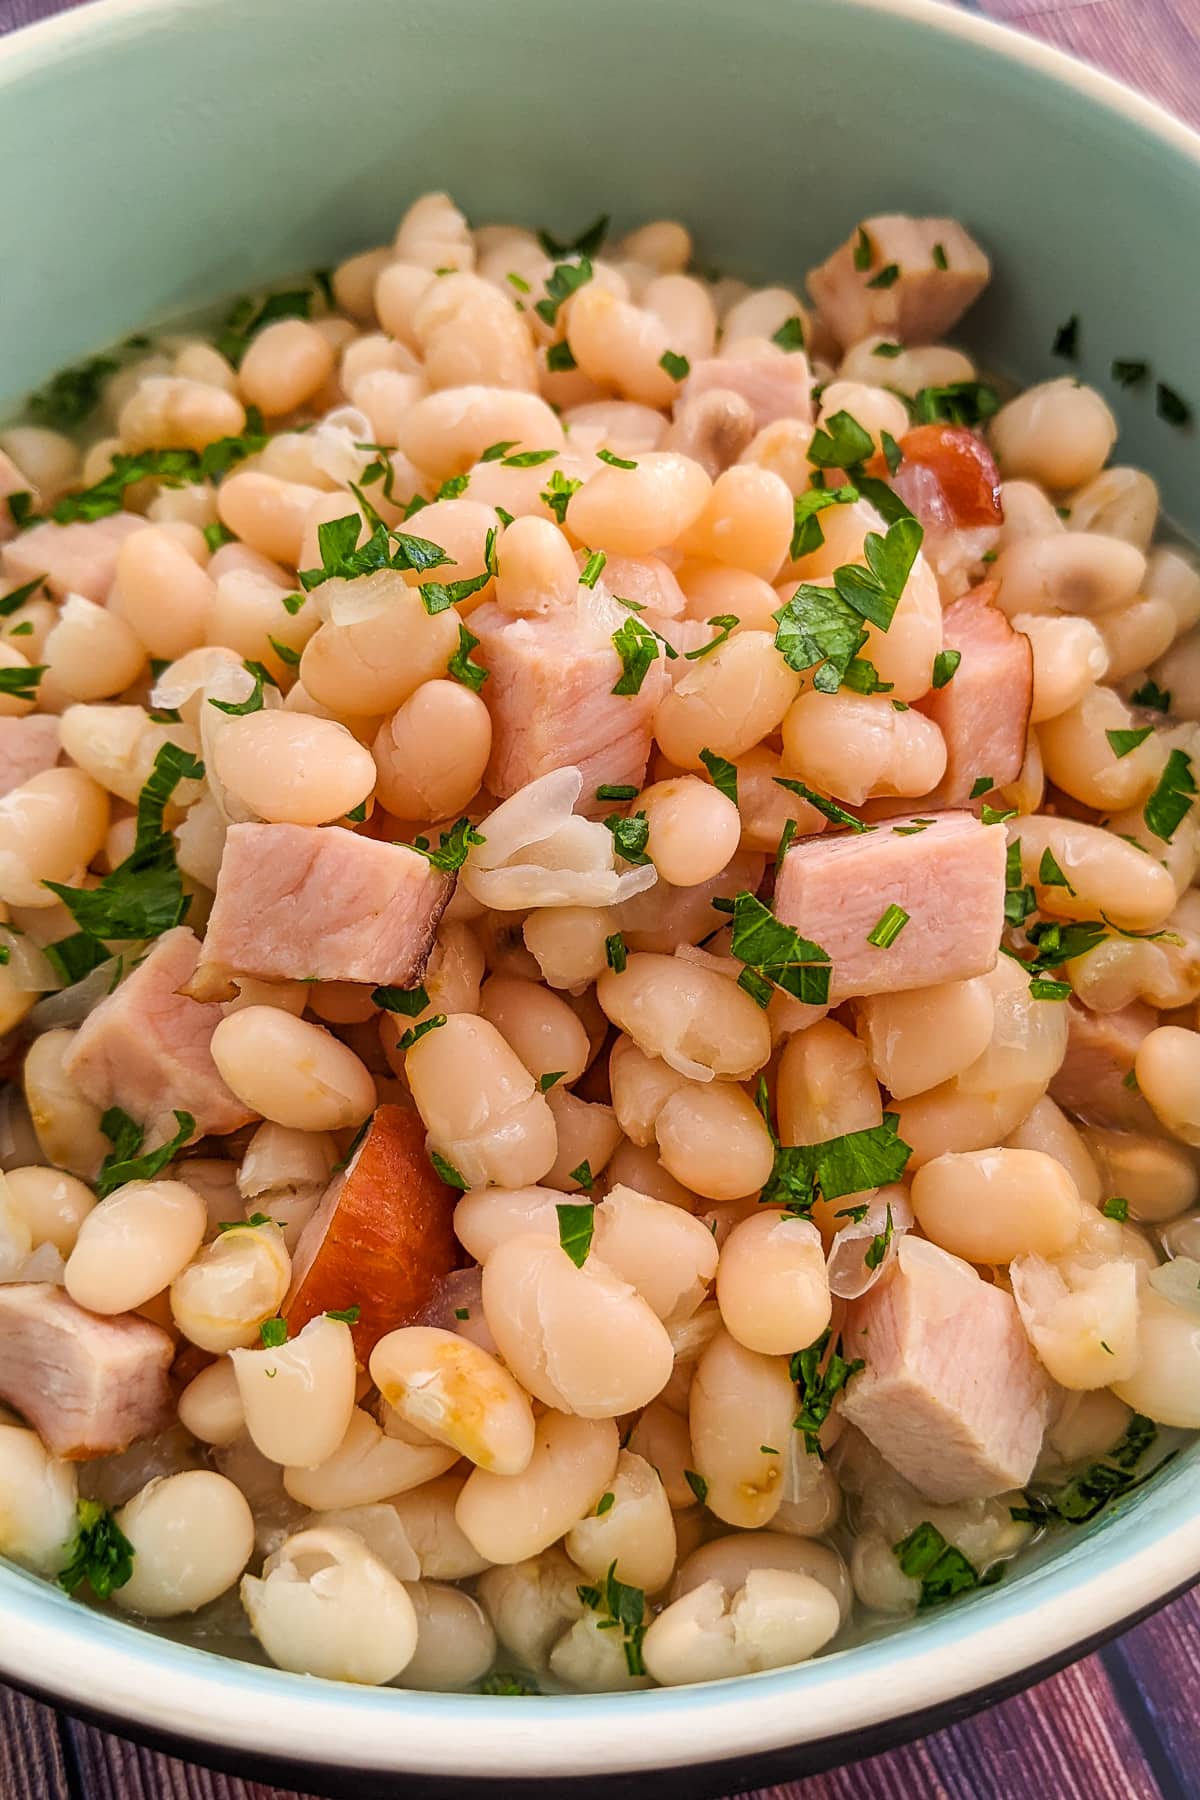 Old fashioned ham and beans stew in a blue bowl.